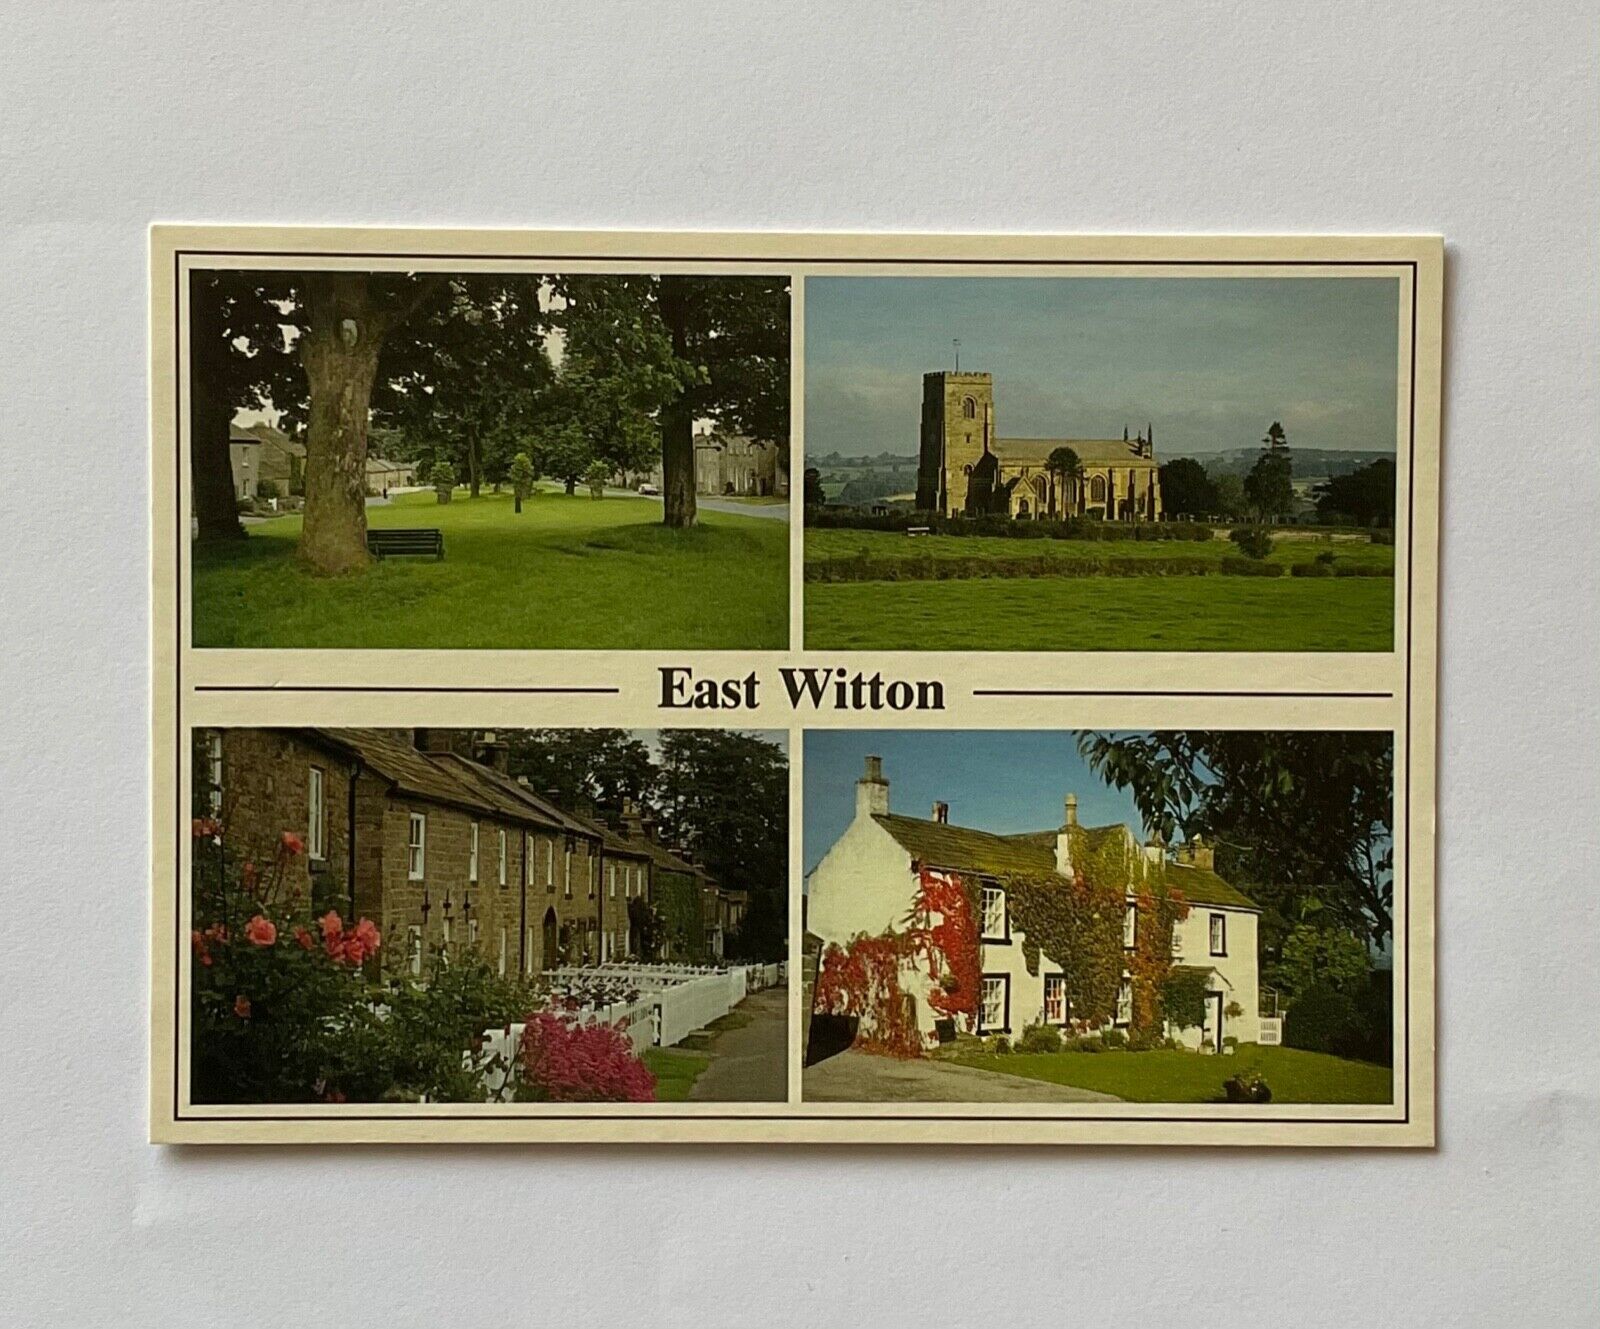 House Clearance - Vintage 1970’s Service- East Wilton, Yorkshire - Pedley Dalescenes - Unposted